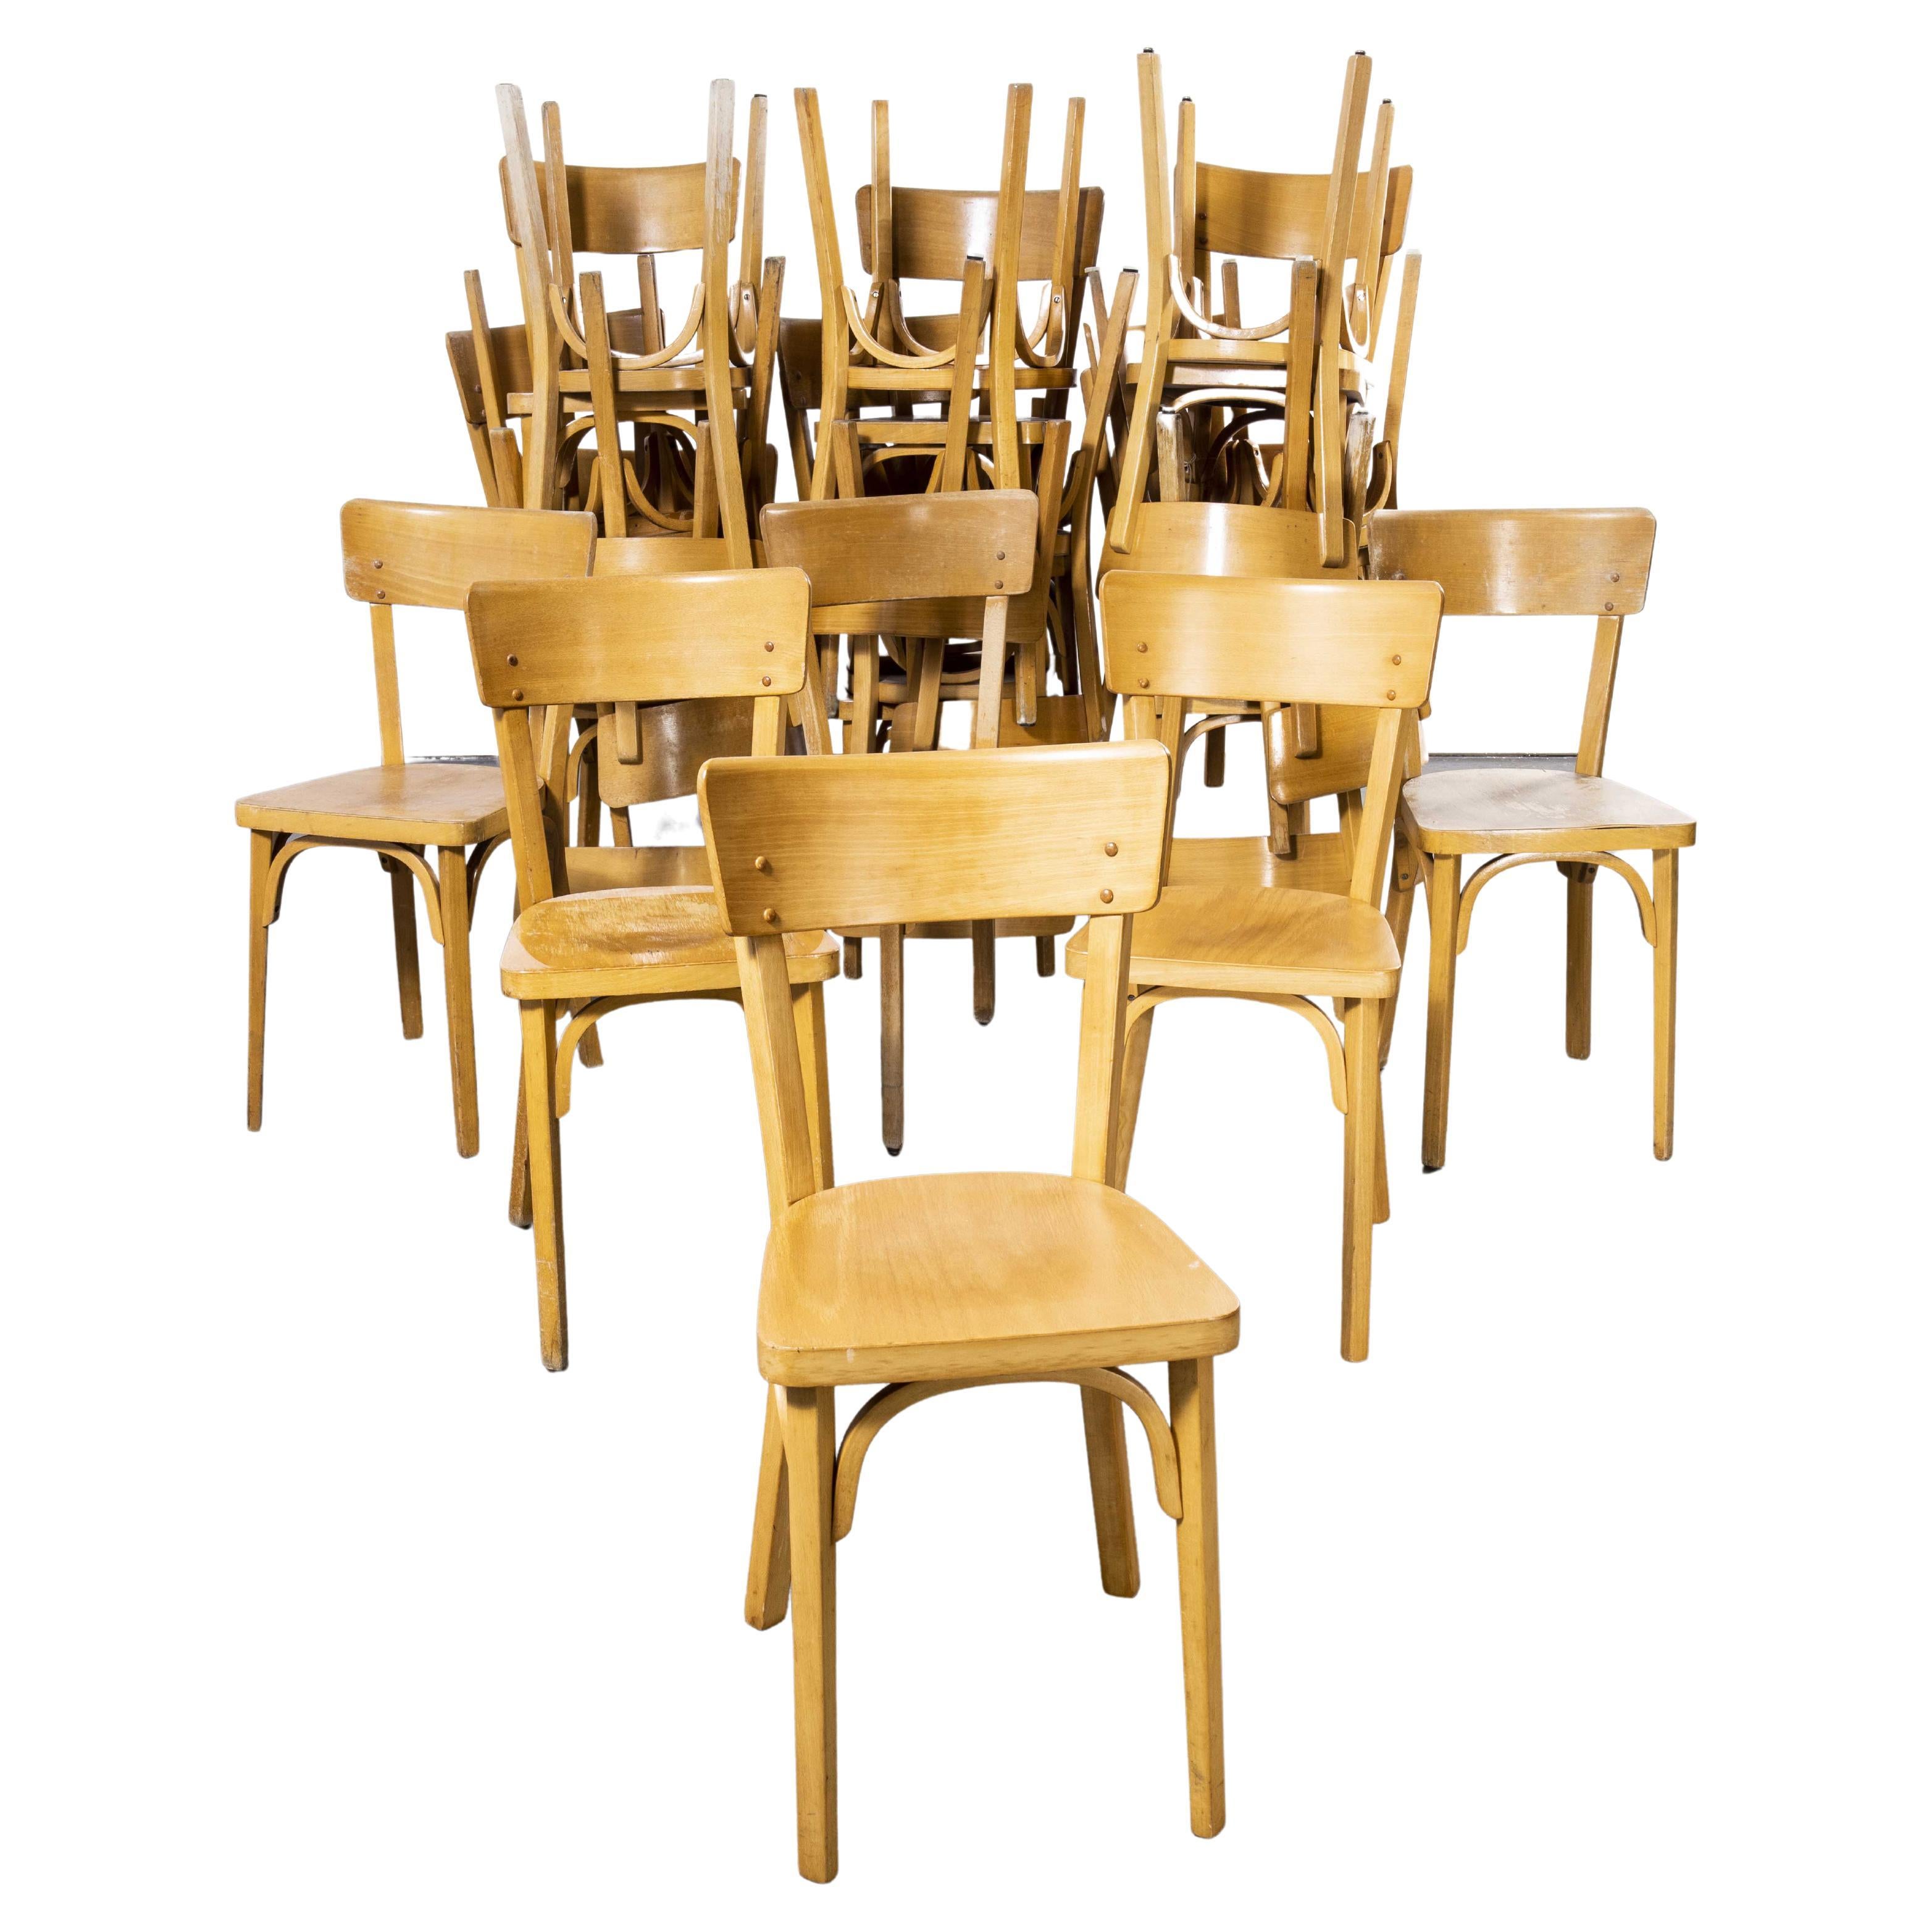 1950's French Baumann Blonde Beech Bentwood Dining Chairs, Various Qyt For Sale